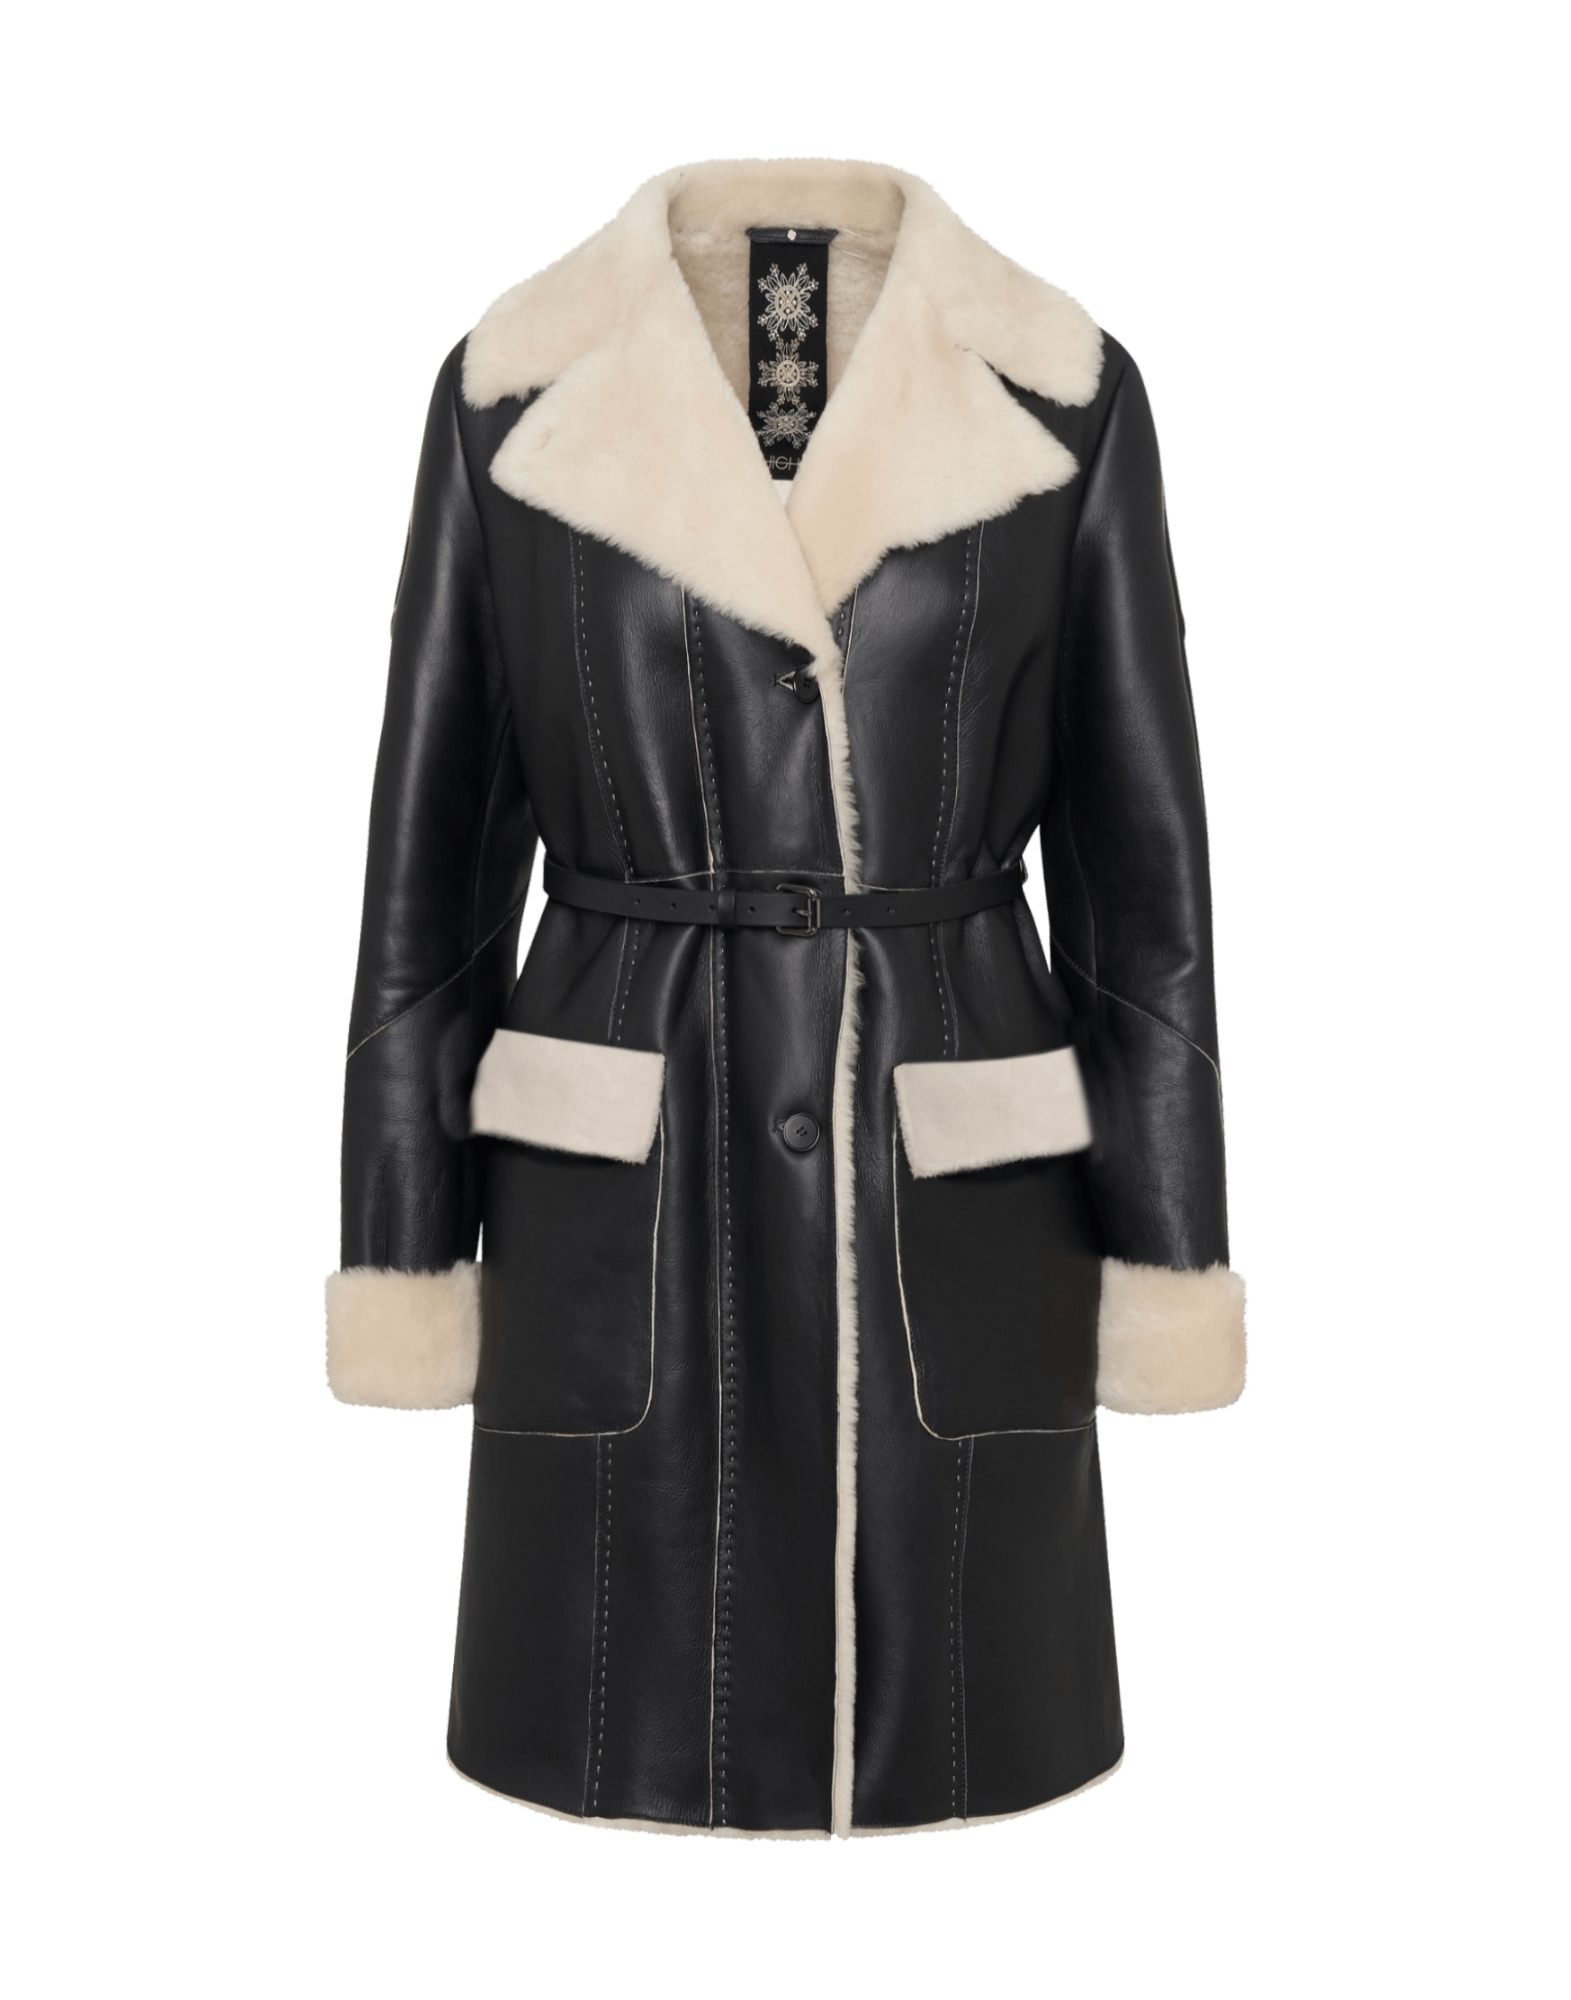 Topshop Faux Leather & Faux Shearling Aviator Jacket | Nordstrom